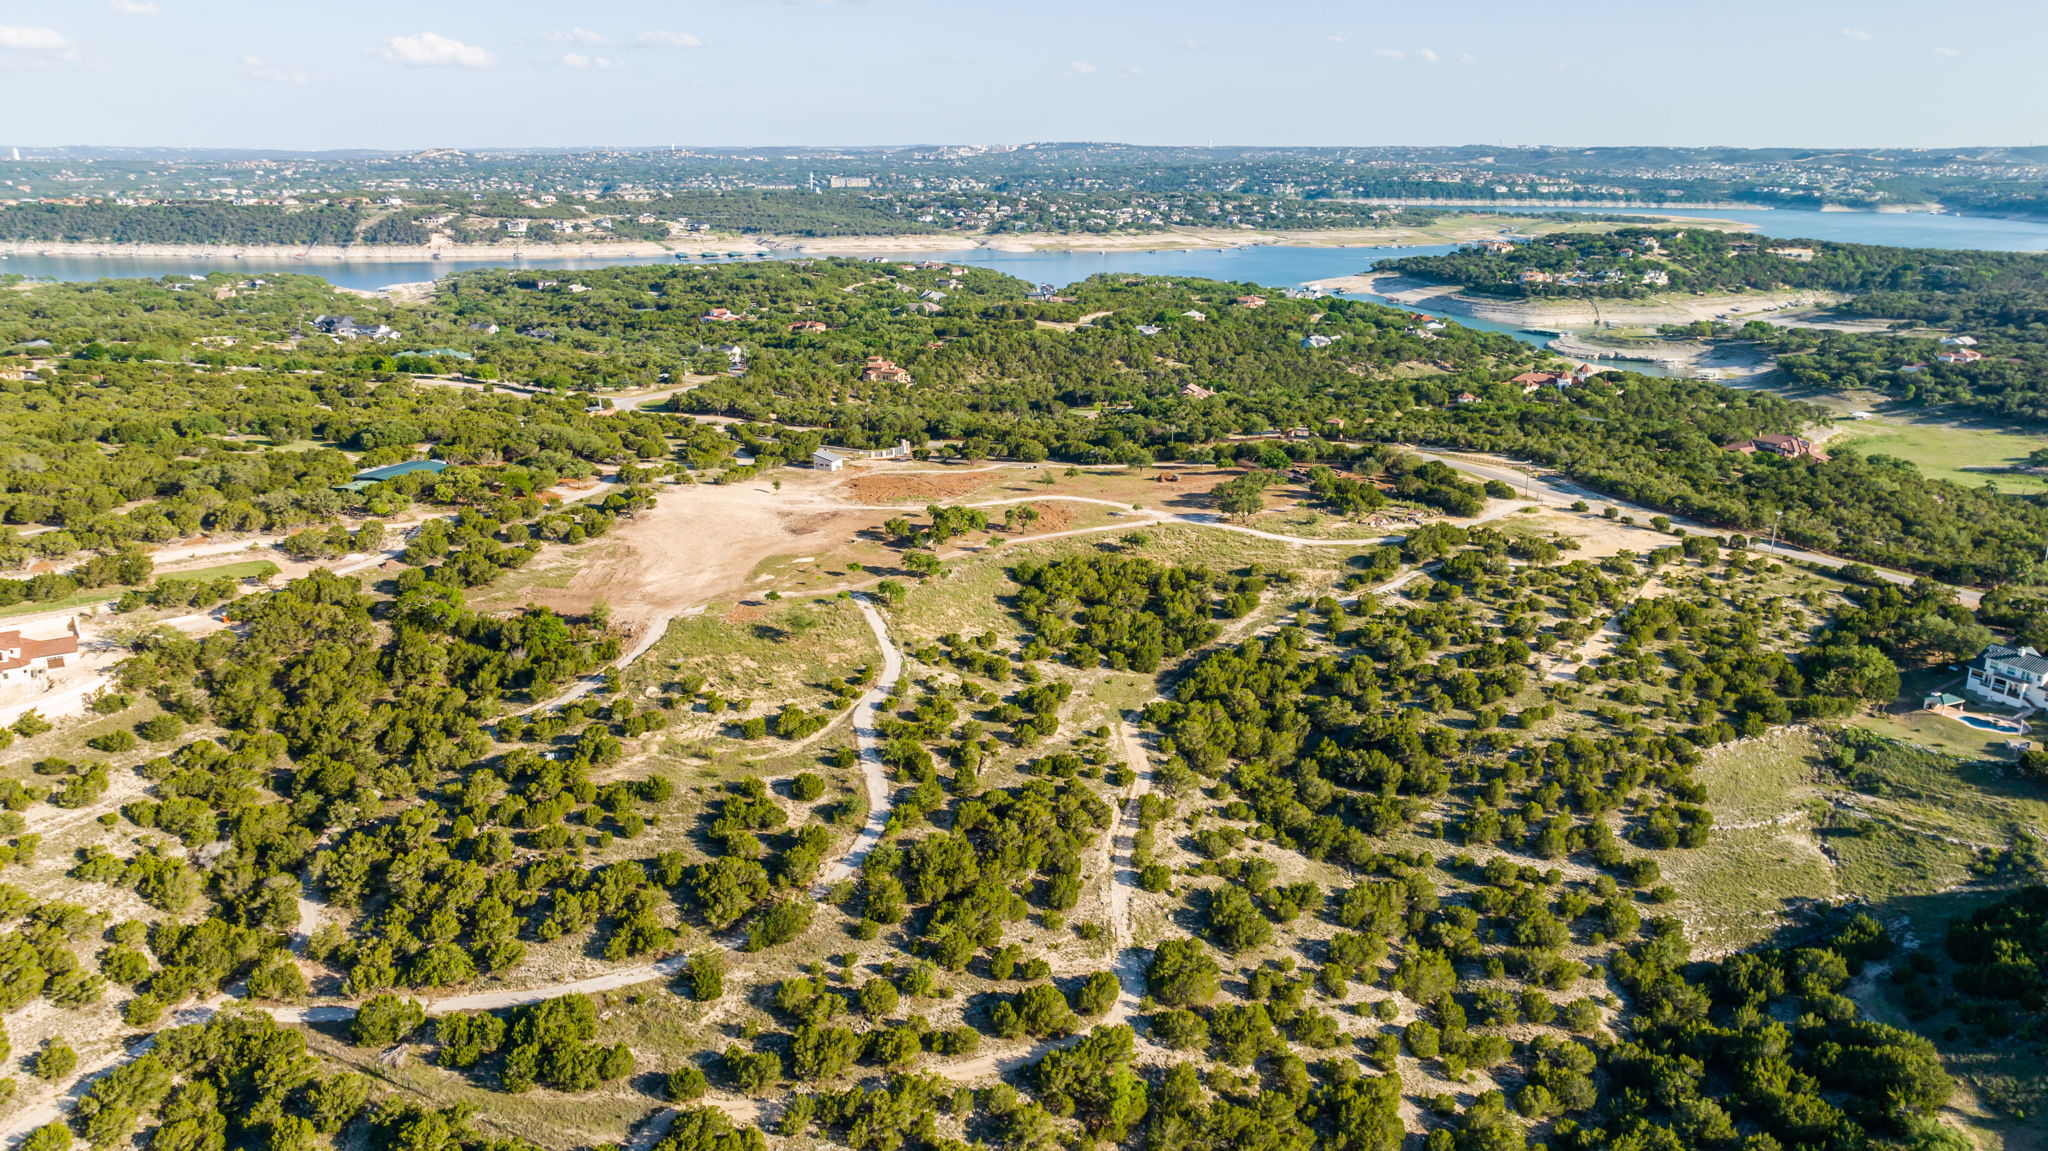 Aerial View shows partially cleared area of the acreage property with Lake Travis in the background and a glimpse of the Coves to the right.